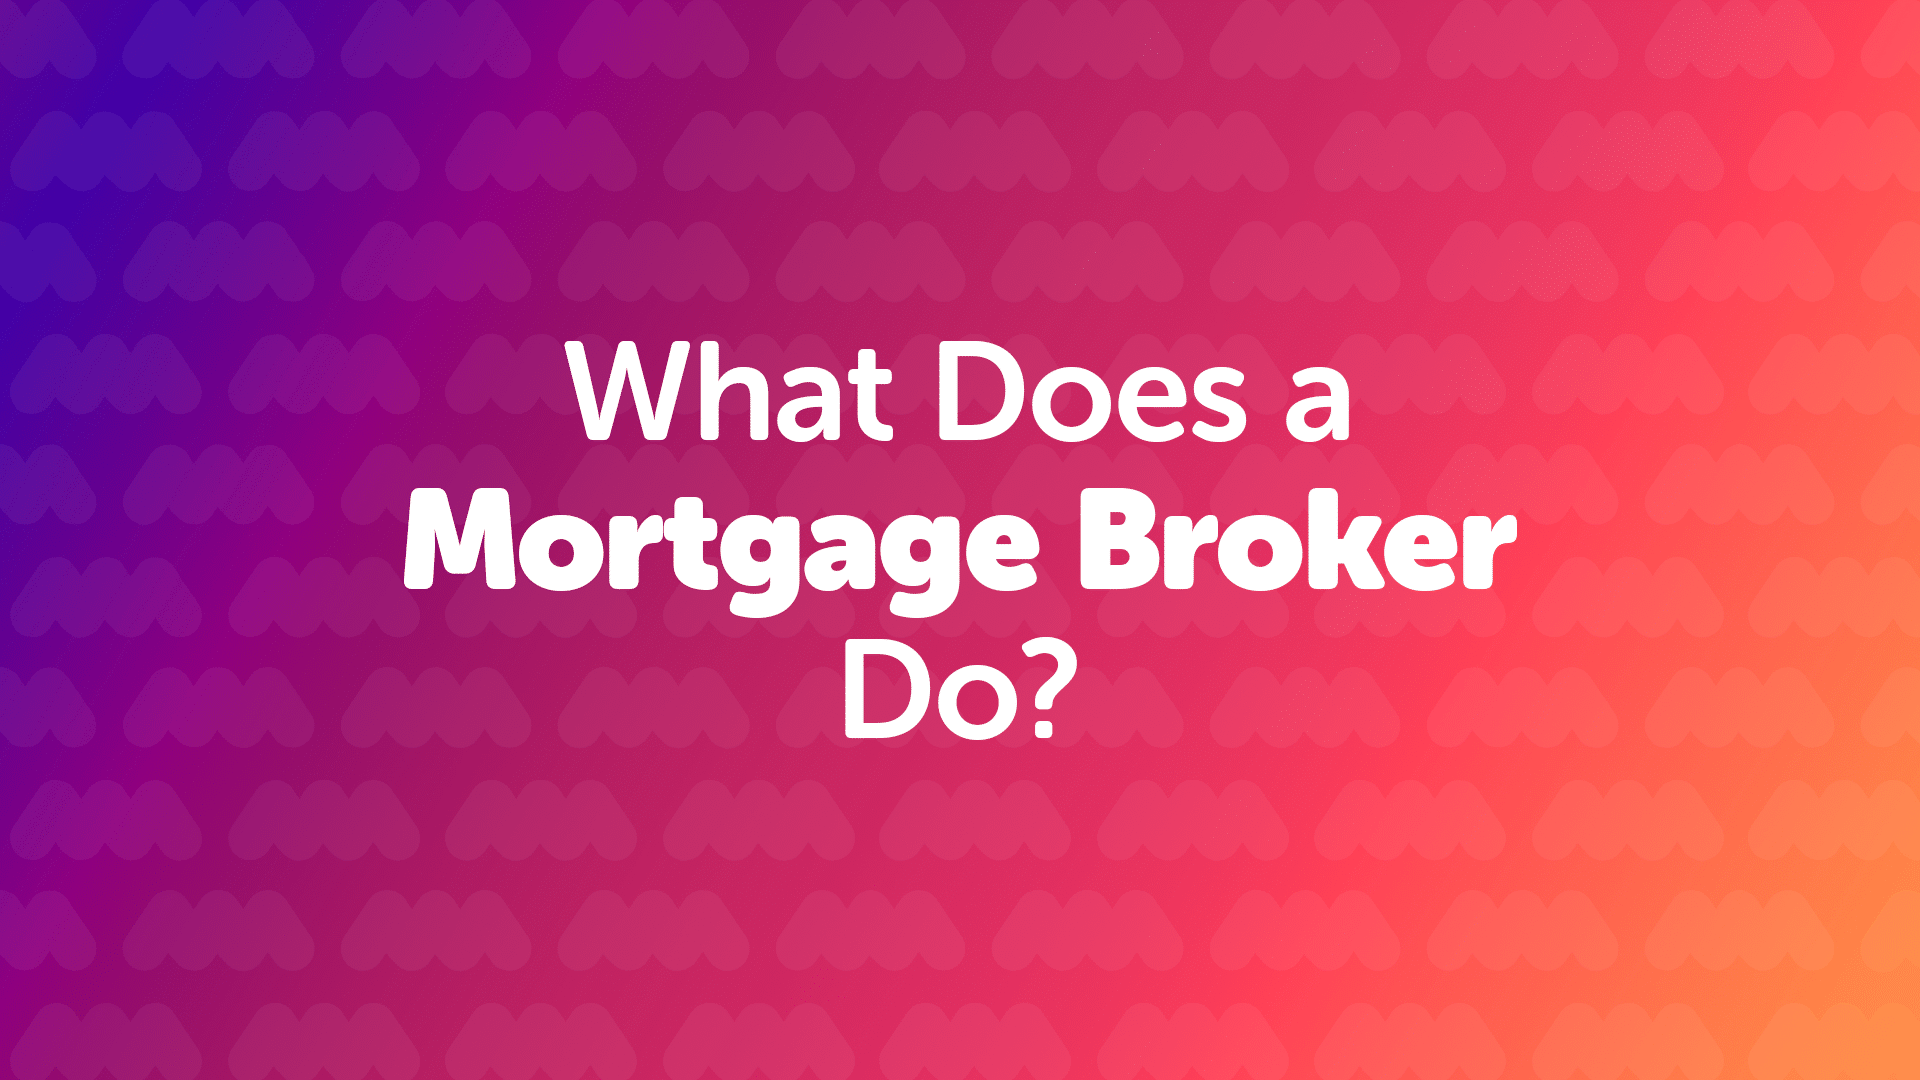 What Does a Mortgage Broker in Manchester Do?